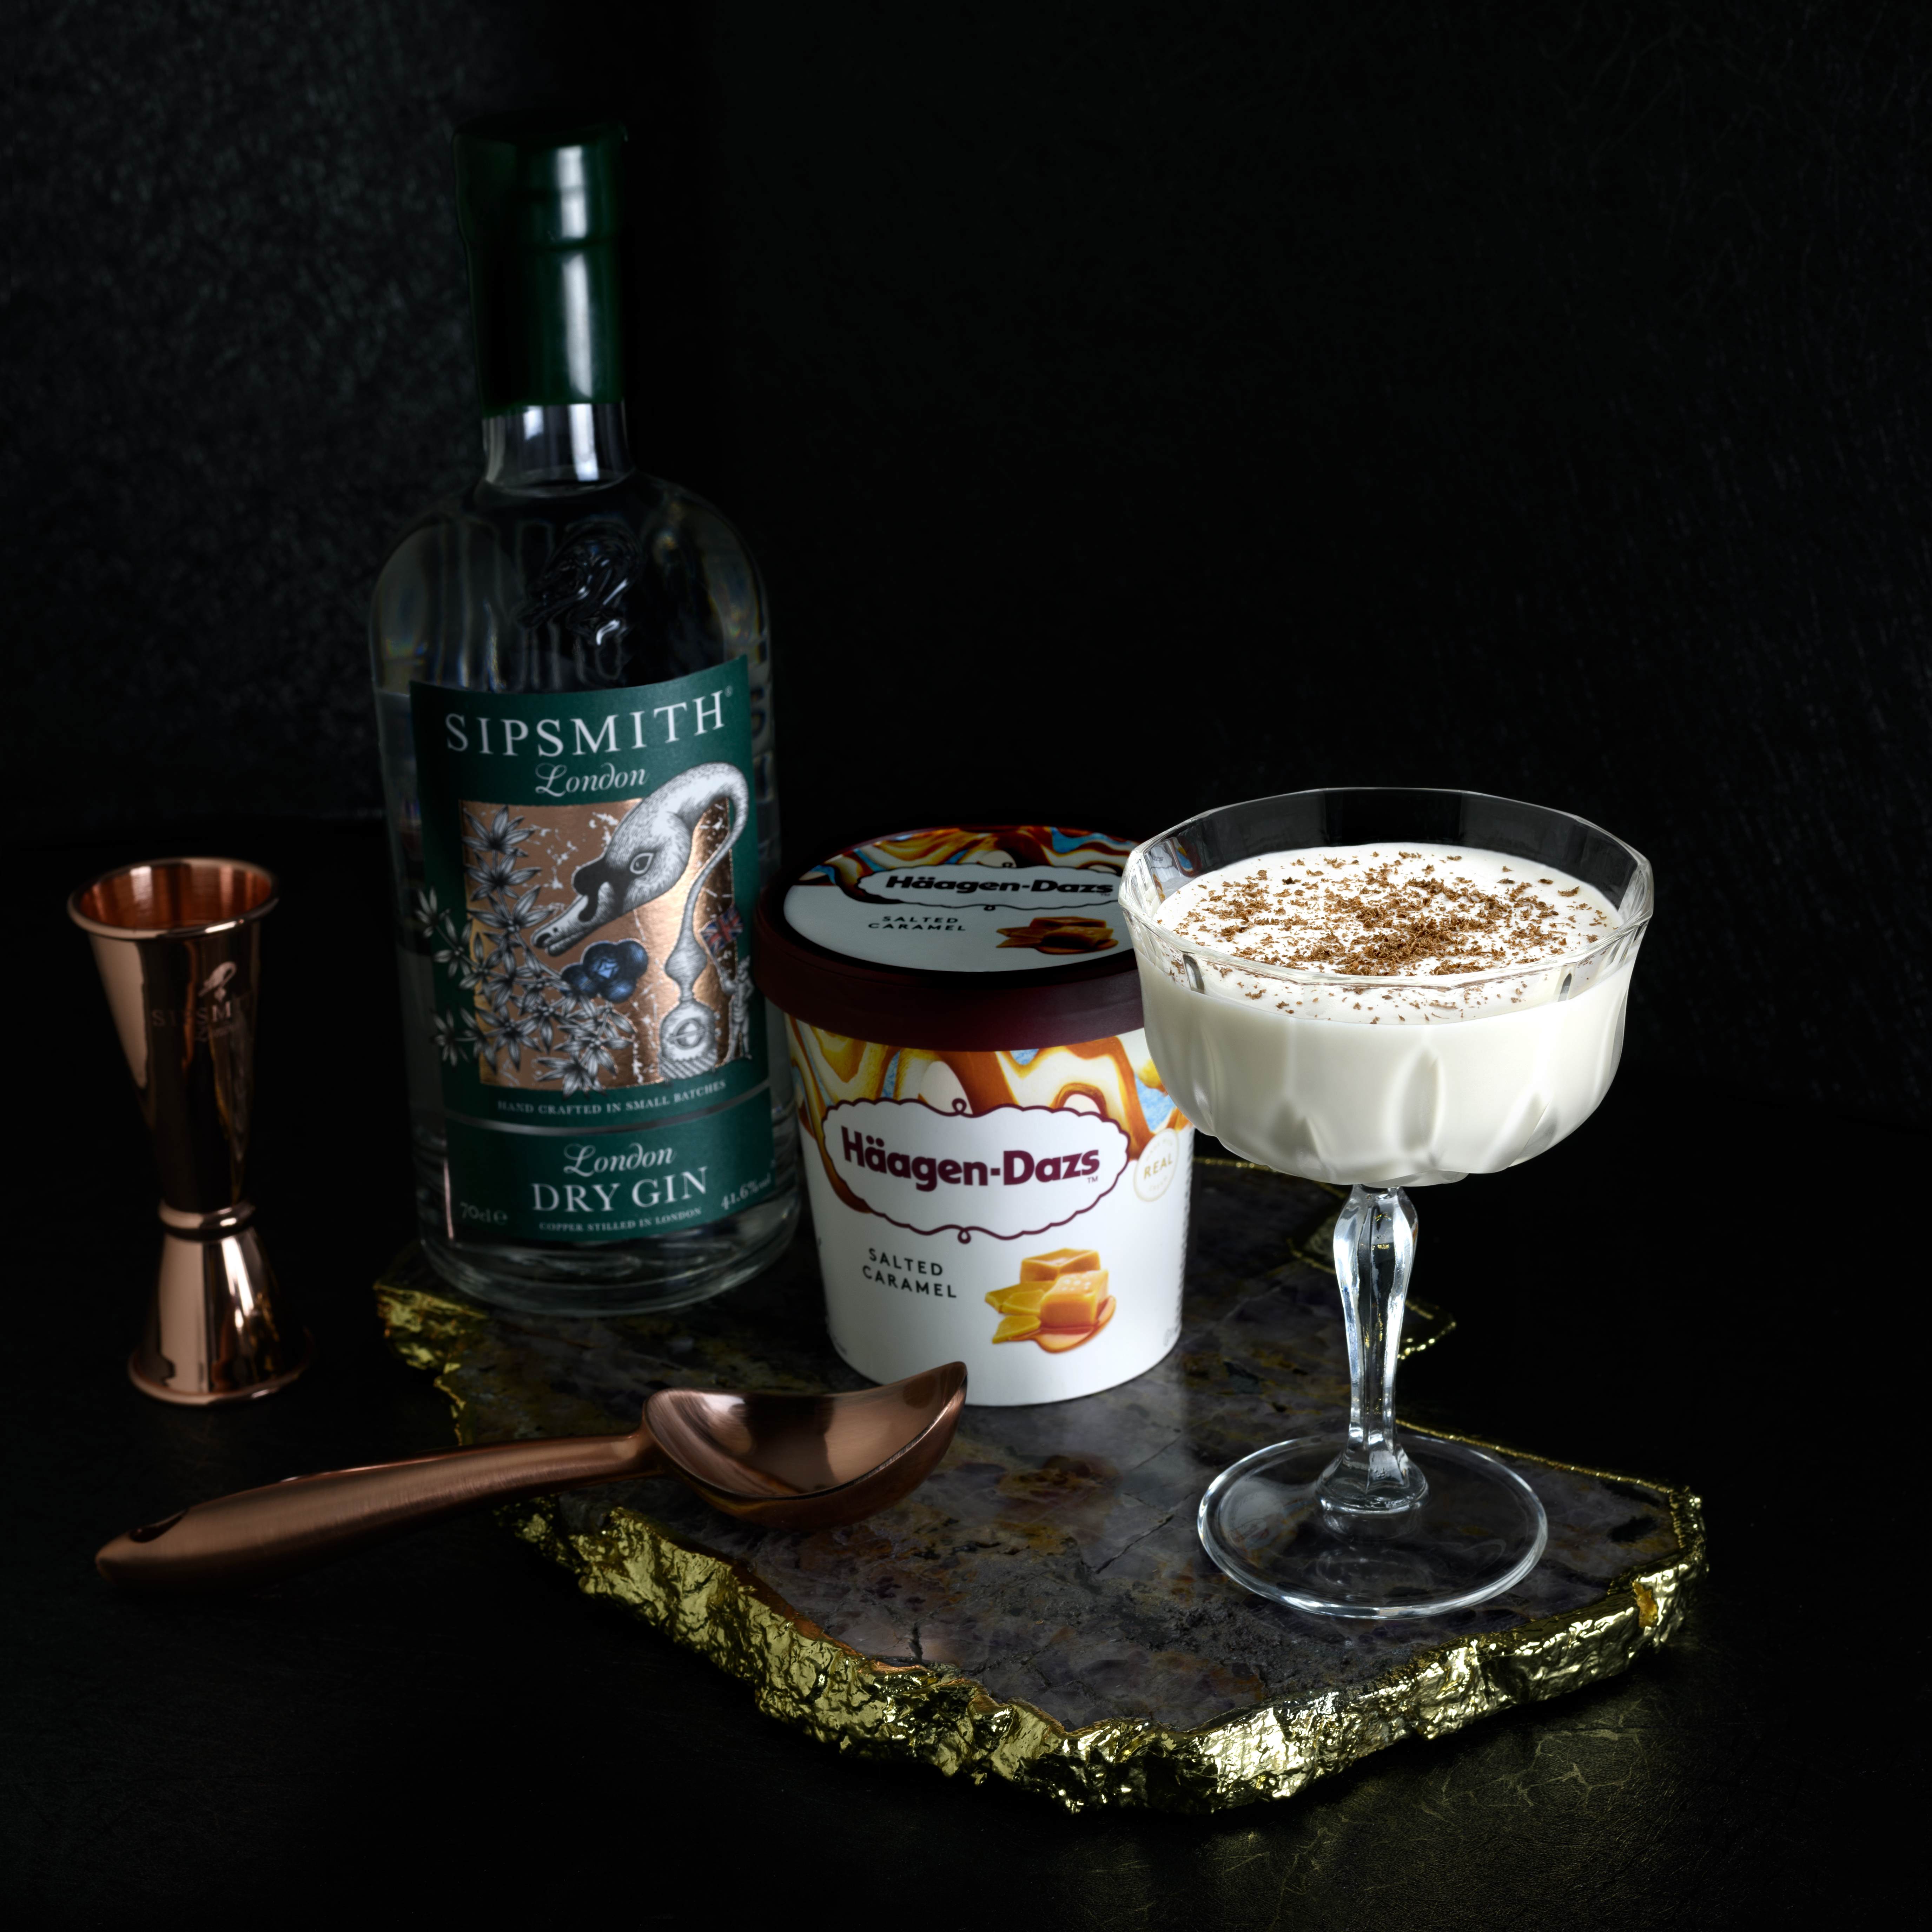 Cocktail made with Haagen Dazs and Sipsmith caramel royale